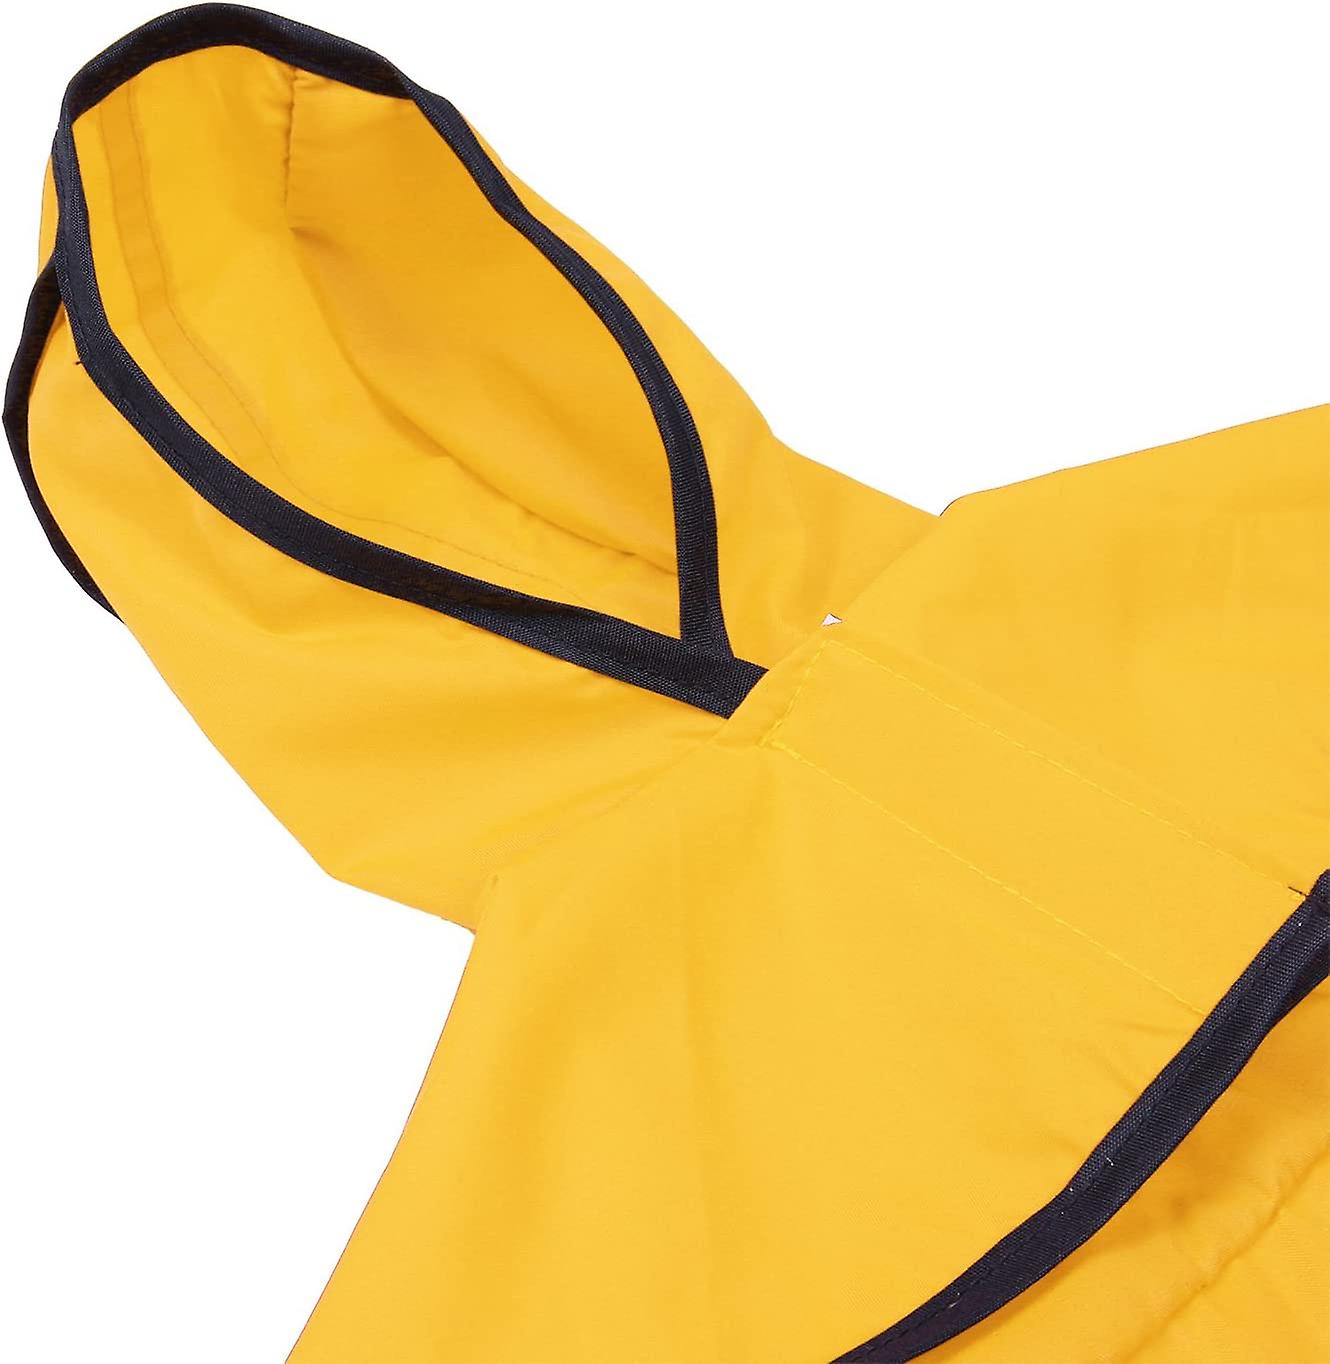 Hooded Dog Raincoat for all sized dogs